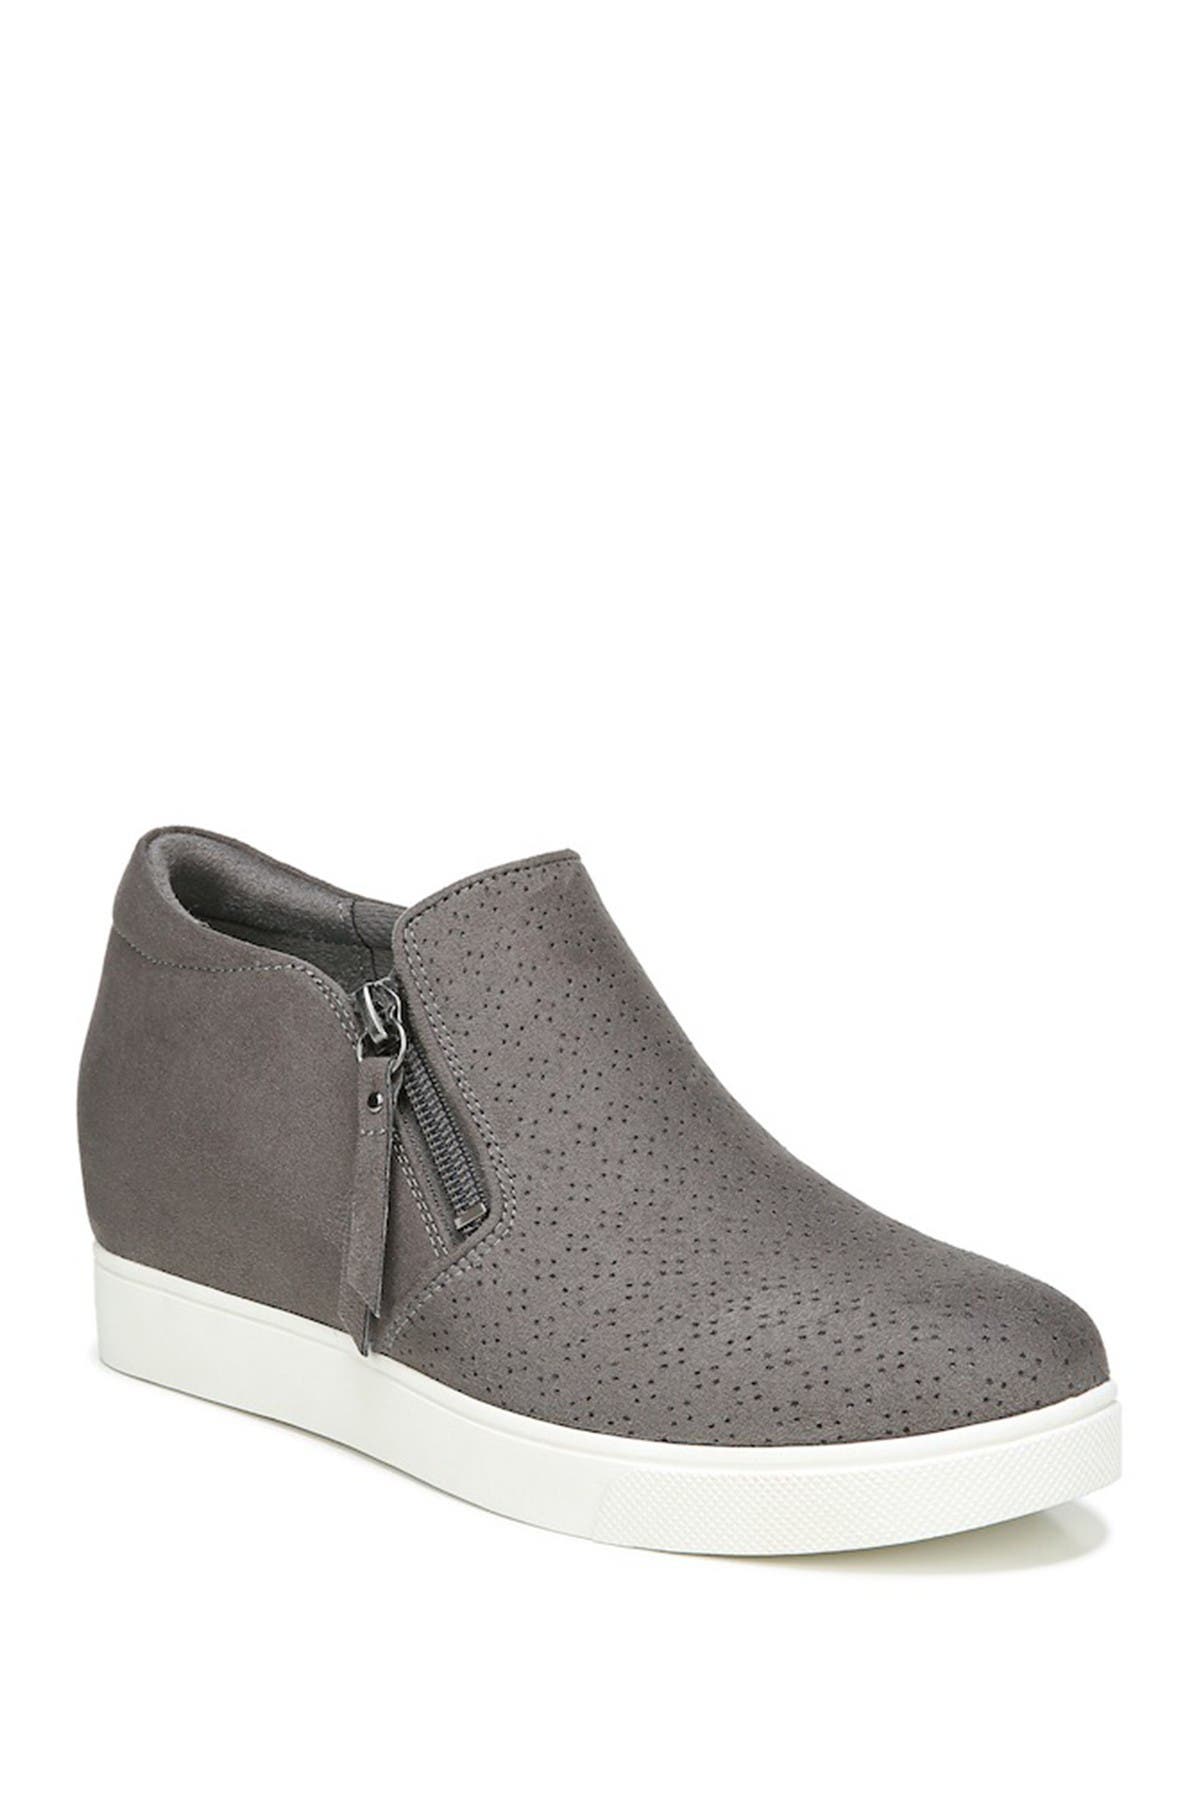 It's All Good Perforated Wedge Sneaker 